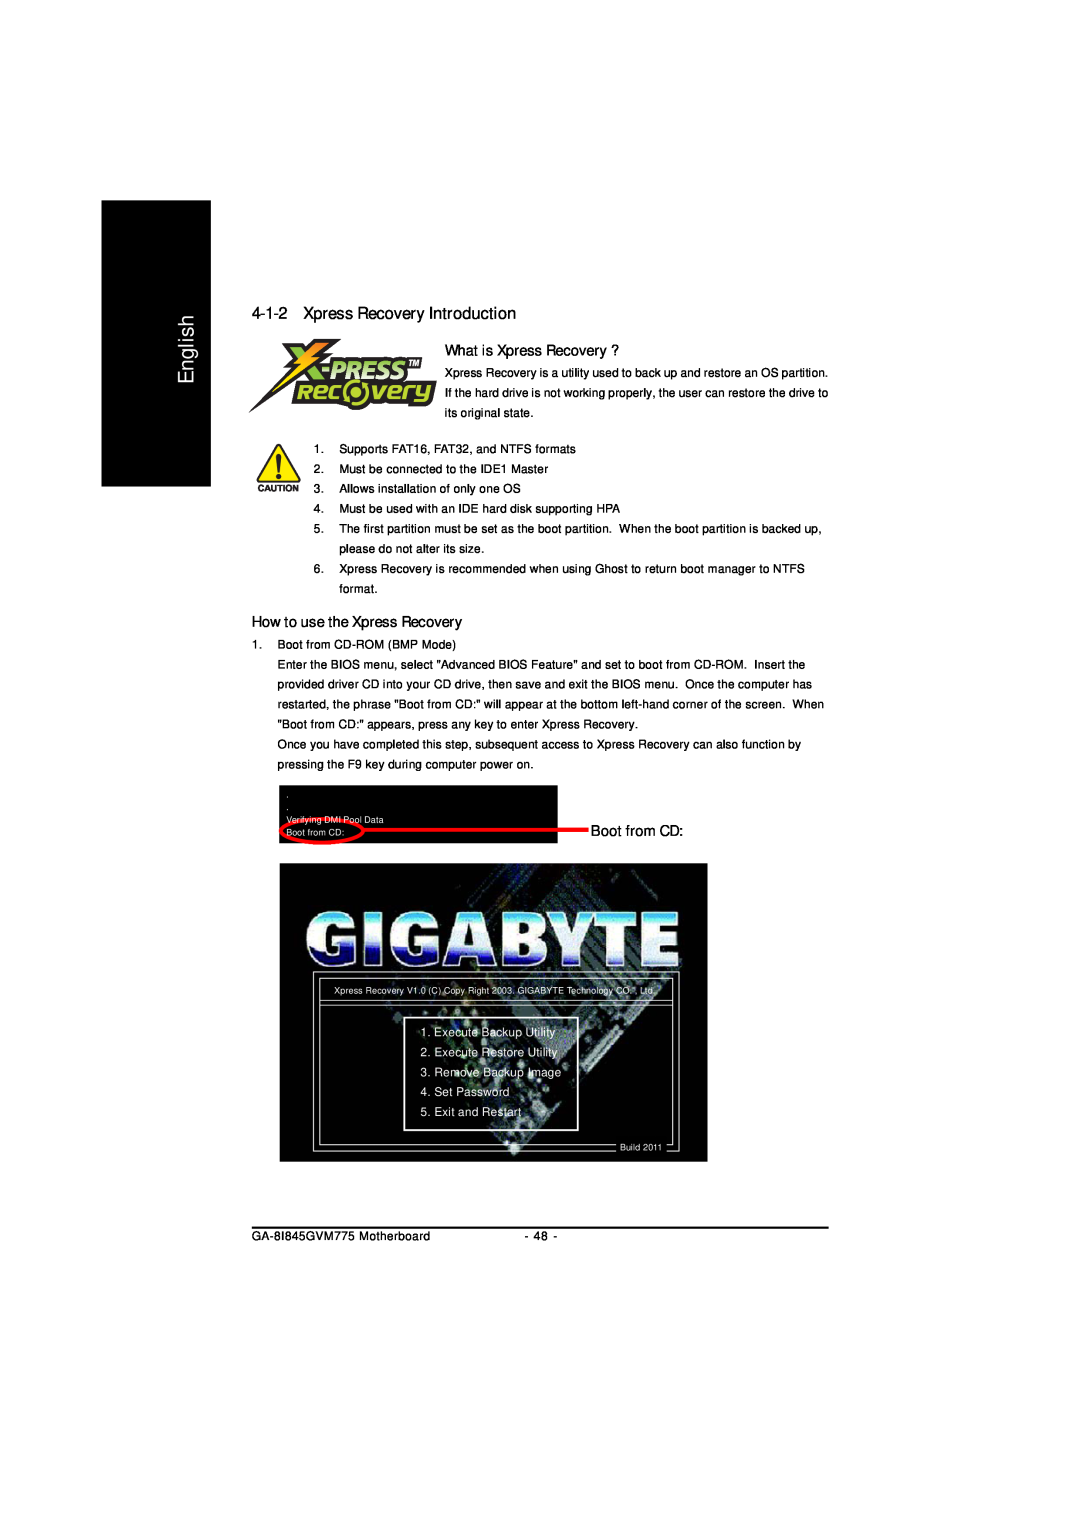 Gigabyte GA-8I845GVM775 Xpress Recovery Introduction, What is Xpress Recovery ?, How to use the Xpress Recovery, English 